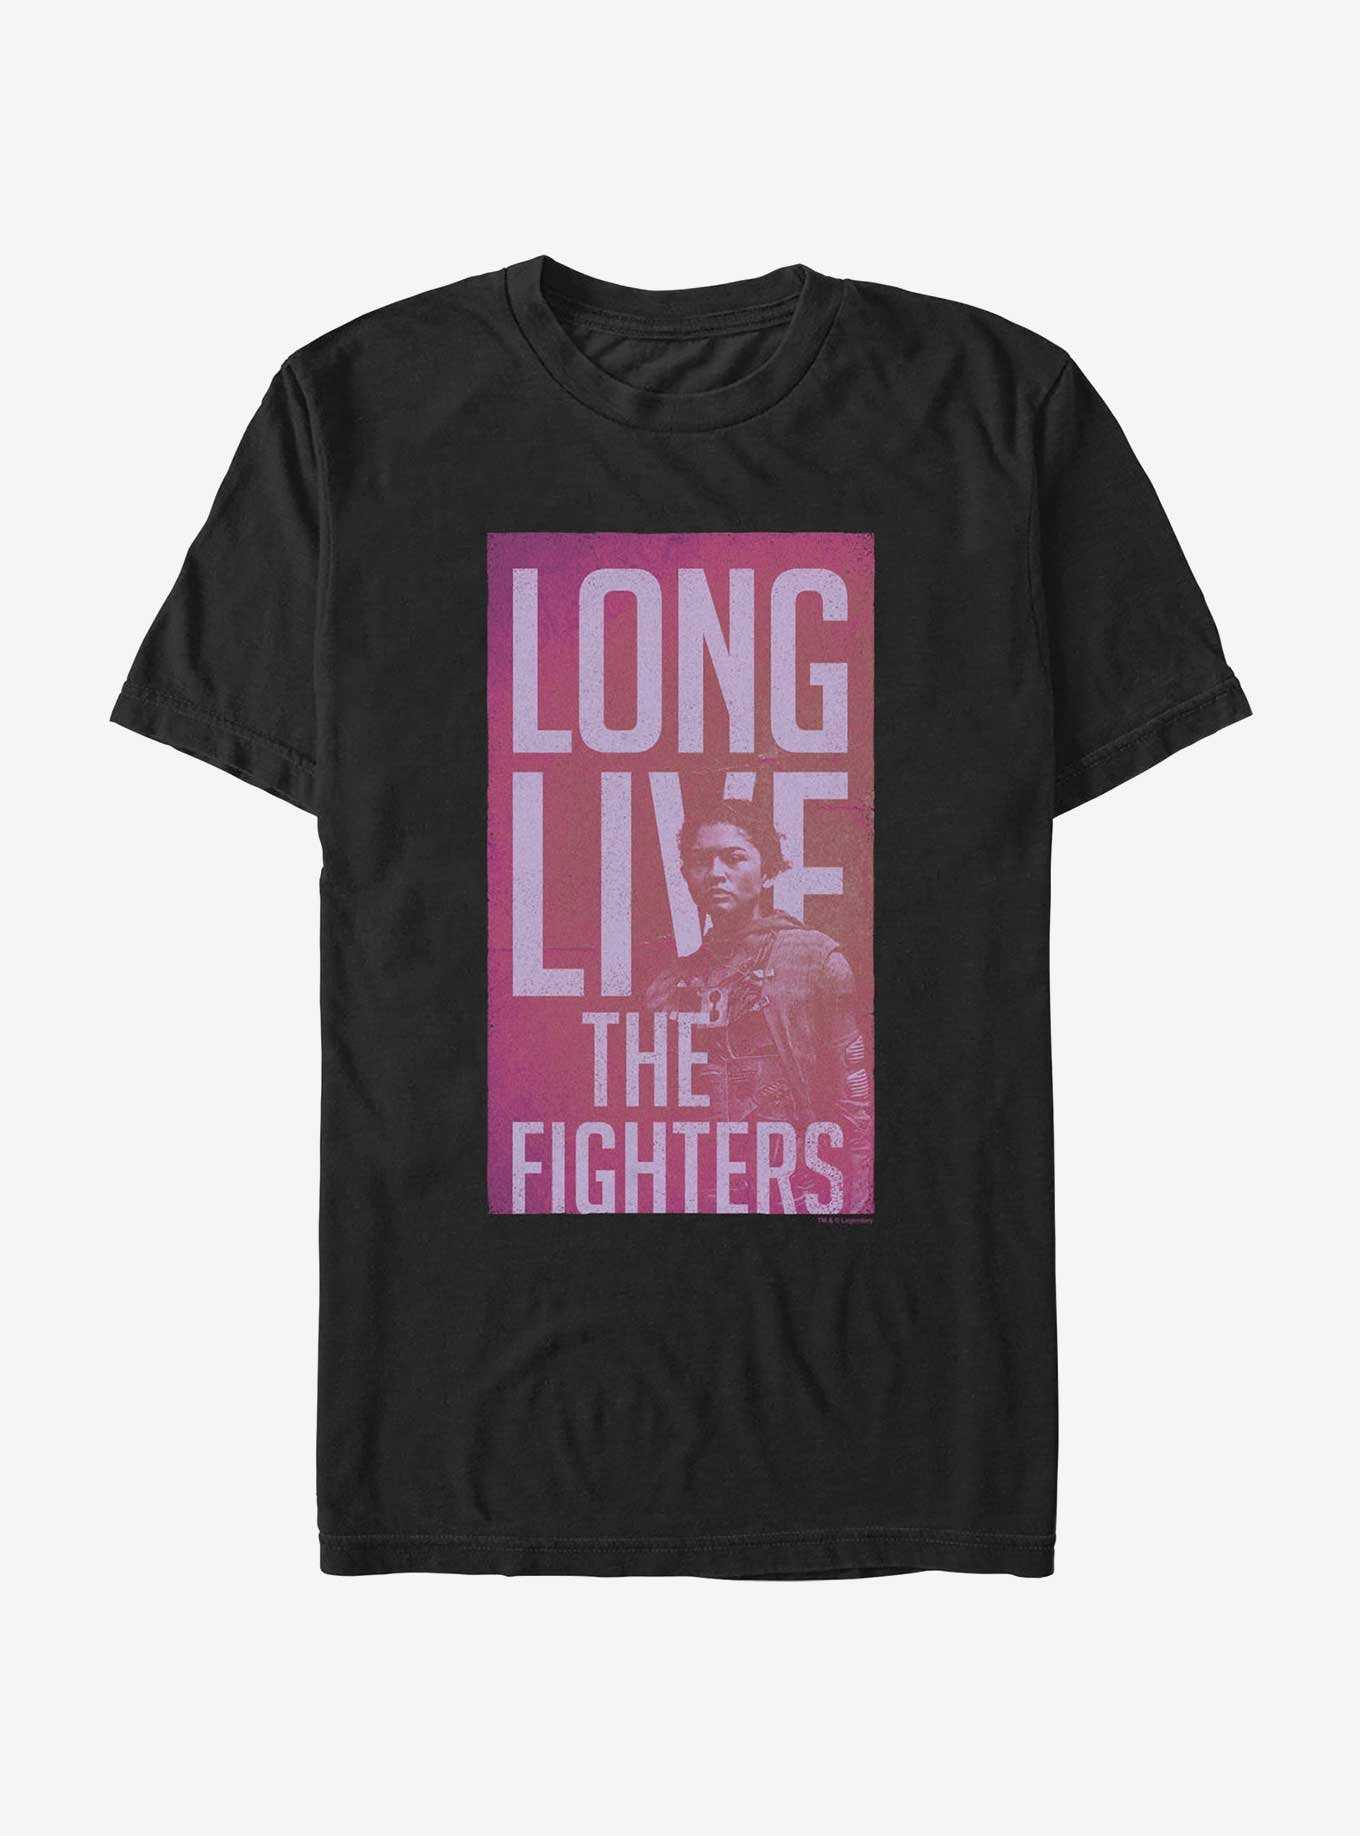 Dune: Part Two Long Live The Fighters Chani T-Shirt, , hi-res